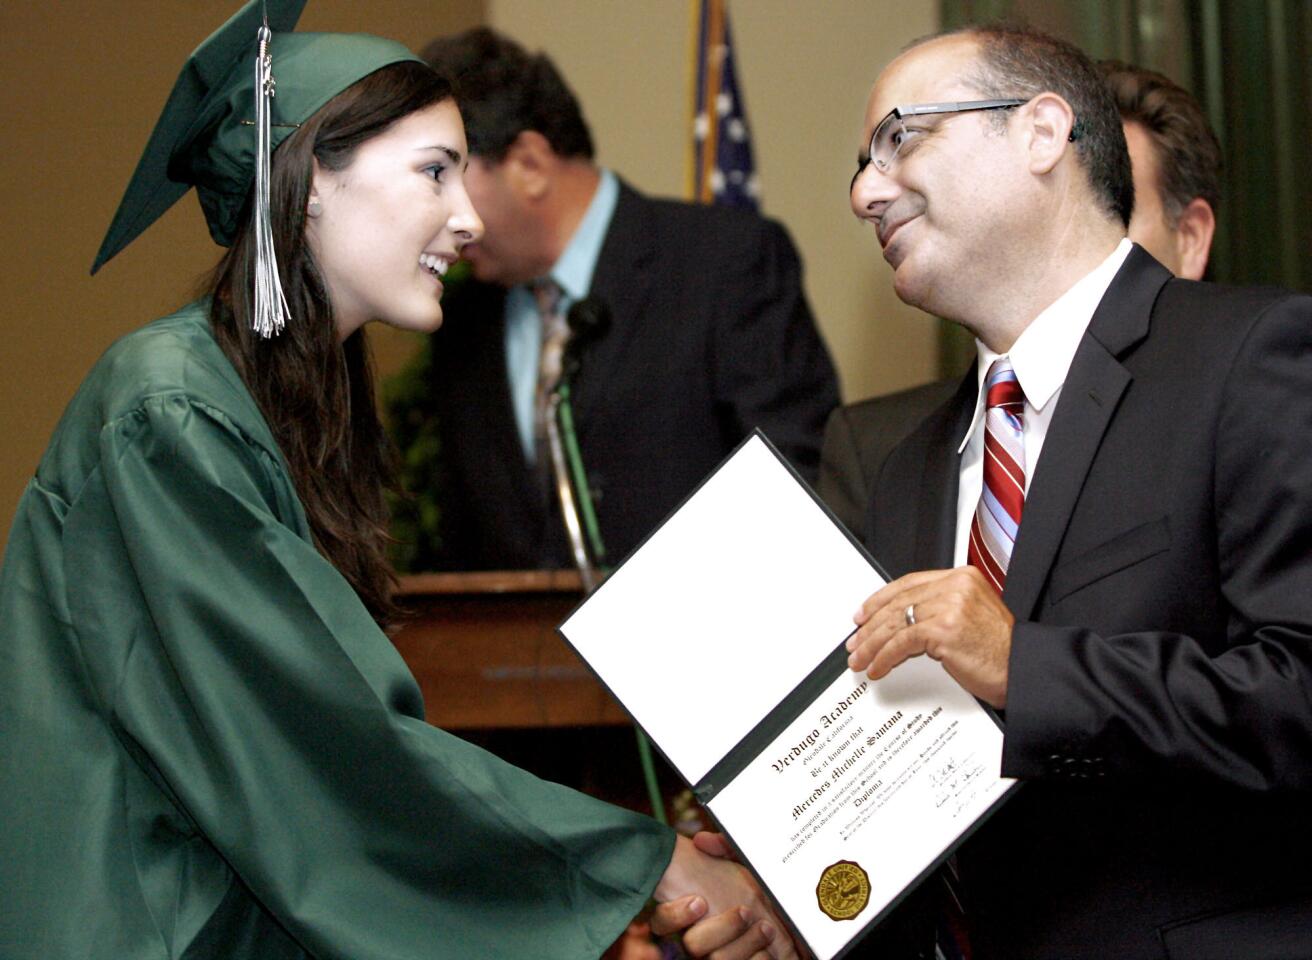 Mercedes Santana, 18 of Huntington Beach, left, gets her diploma from GUSD board member Greg Krikorian at the Verdugo Academy graduation at the First United Methodist Church Carlson Fellowship Hall in Glendale on Thursday, June 14, 2012. Glendale Unified School District's Daily HS, Re-Connected Glendale and Verdugo Academy held the commencement exercises at the same time and location.